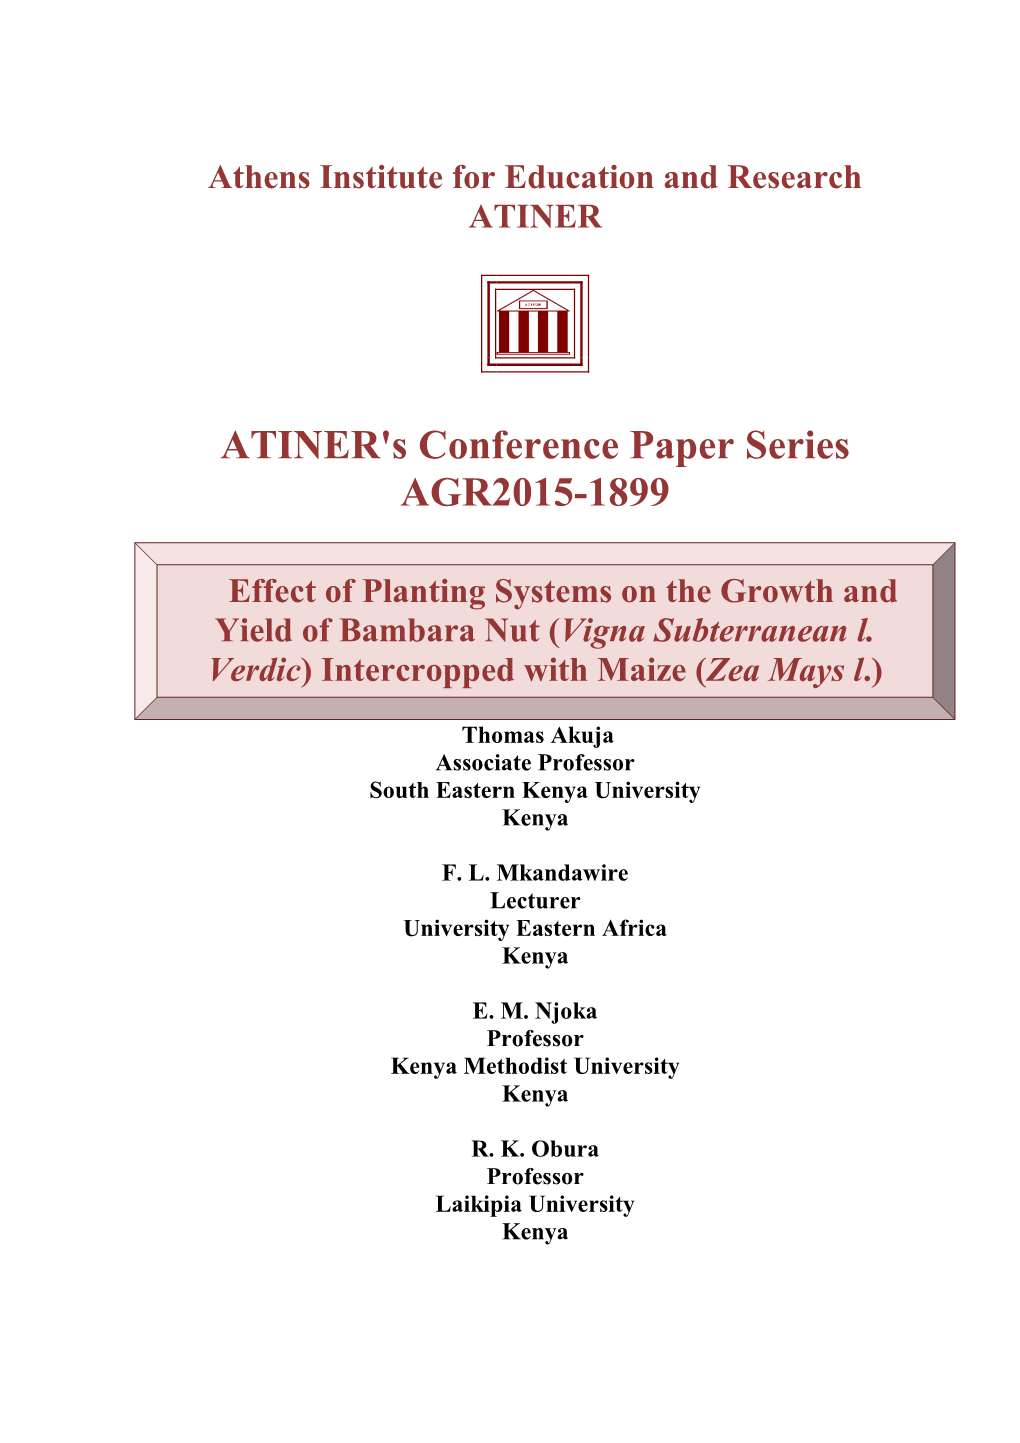 ATINER's Conference Paper Series AGR2015-1899